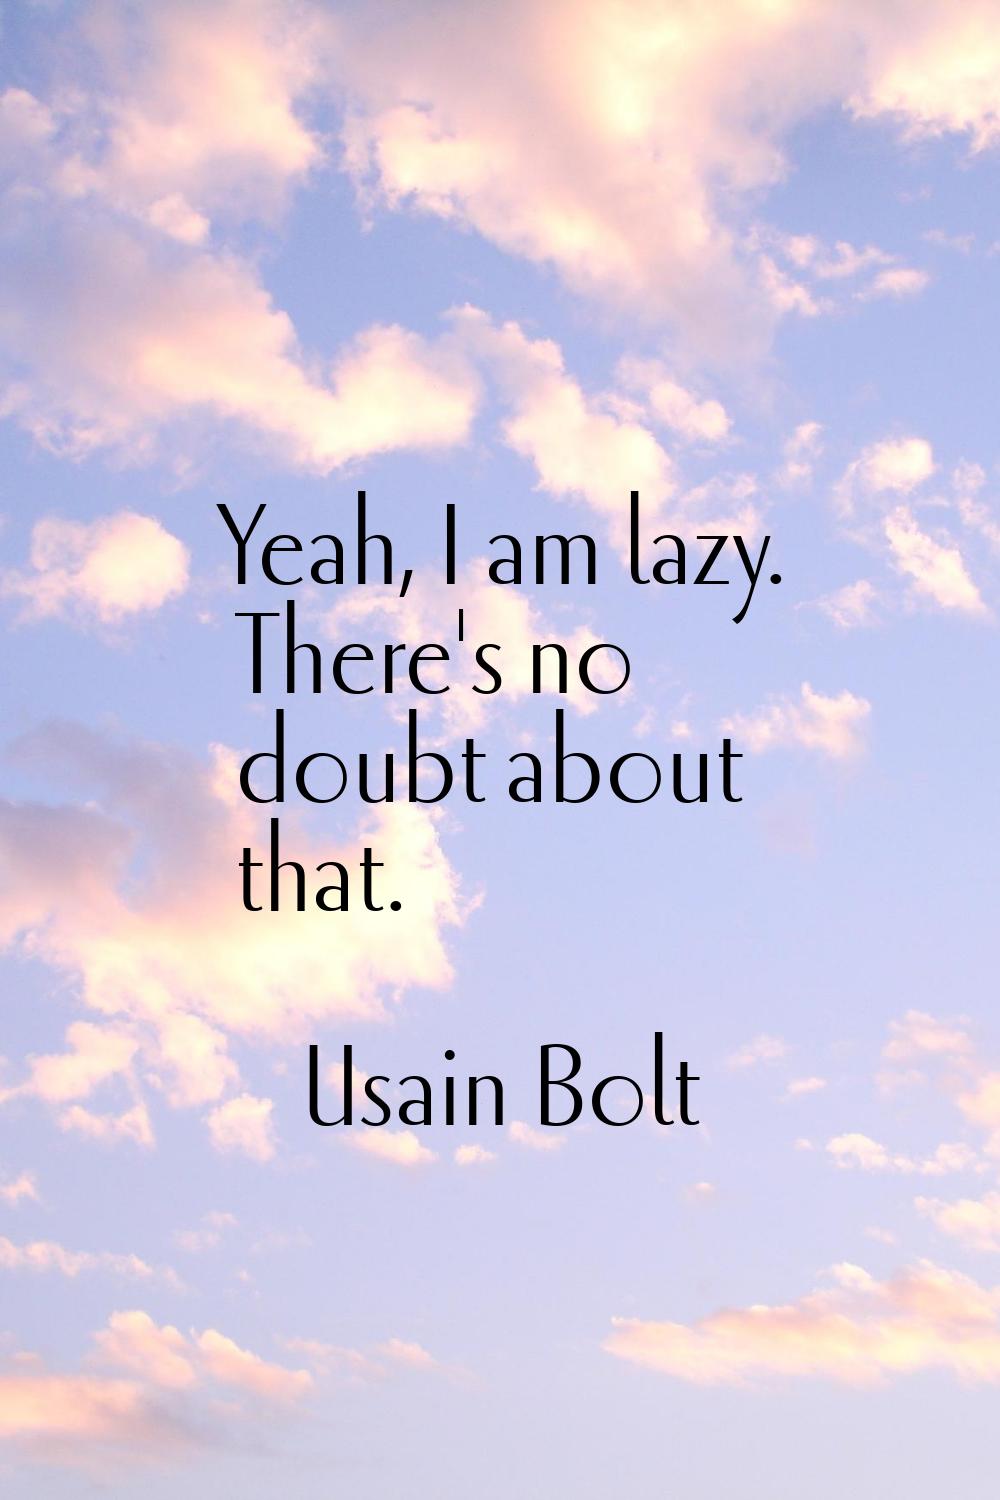 Yeah, I am lazy. There's no doubt about that.